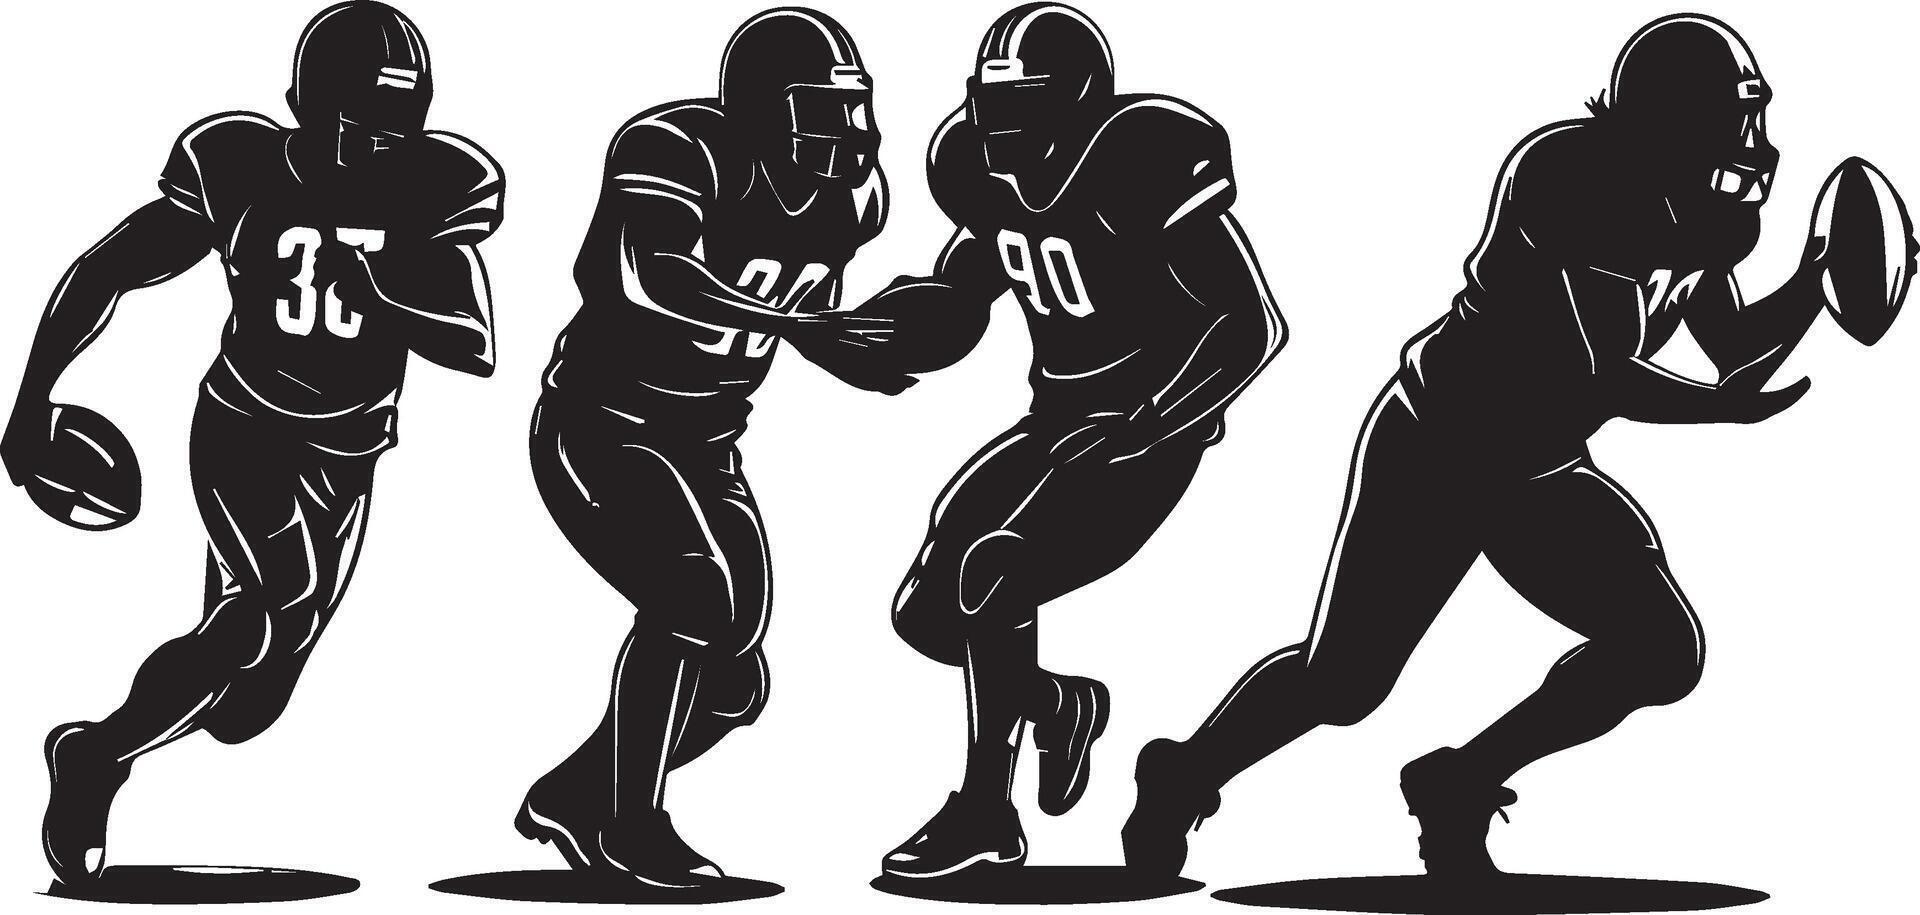 American football players silhouettes vector